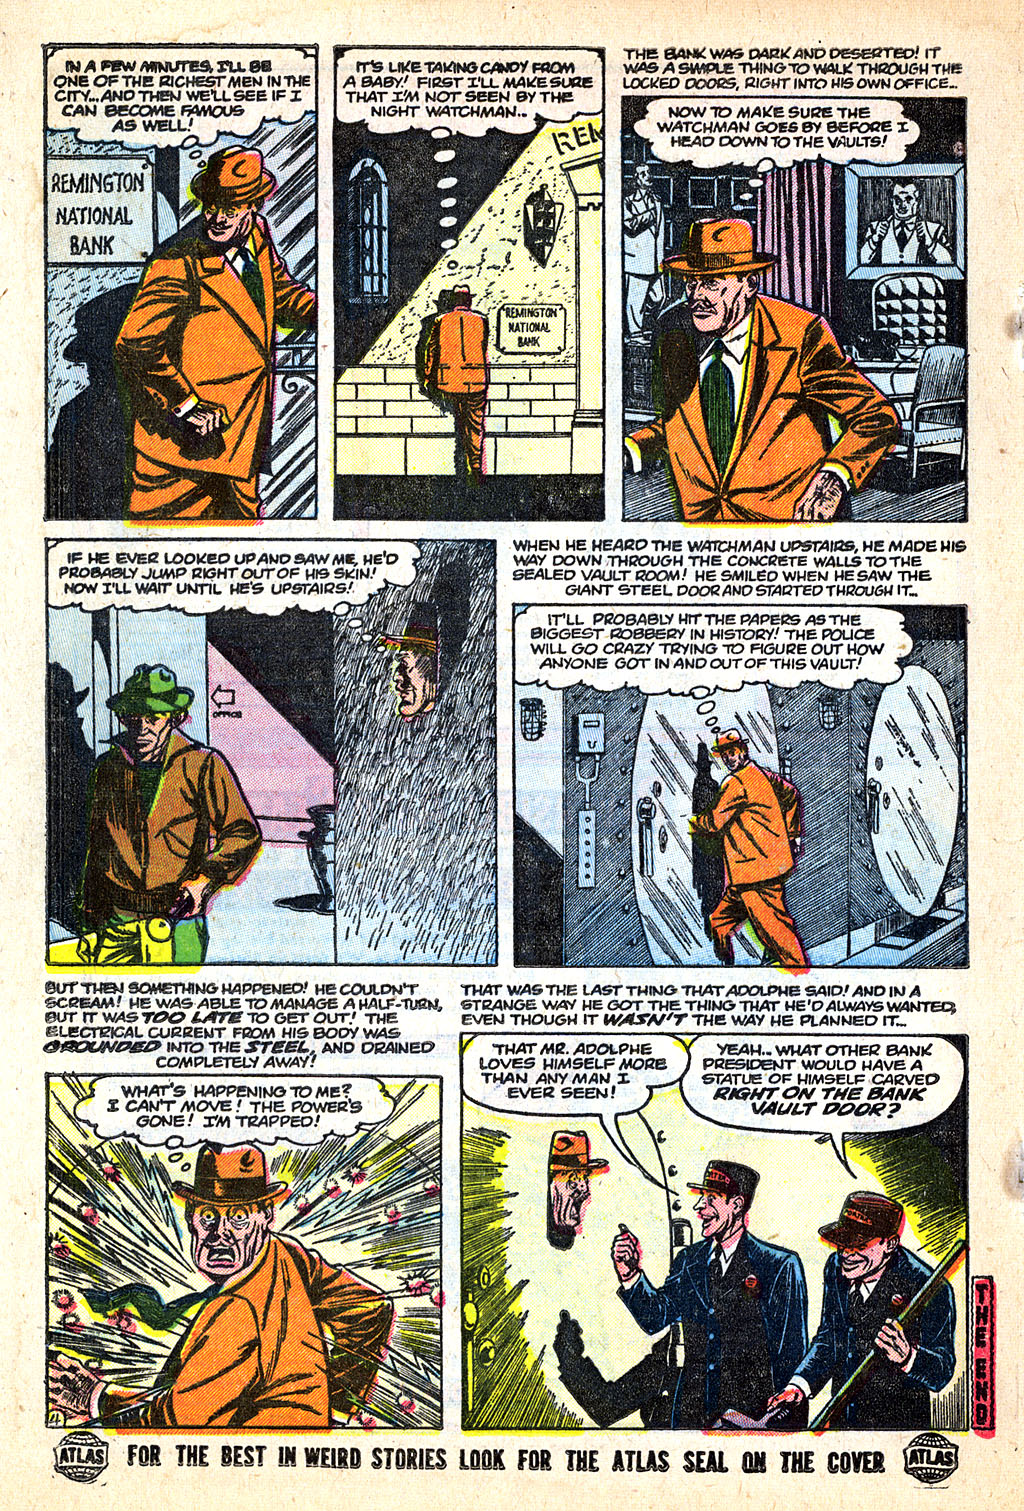 Marvel Tales (1949) 127 Page 19